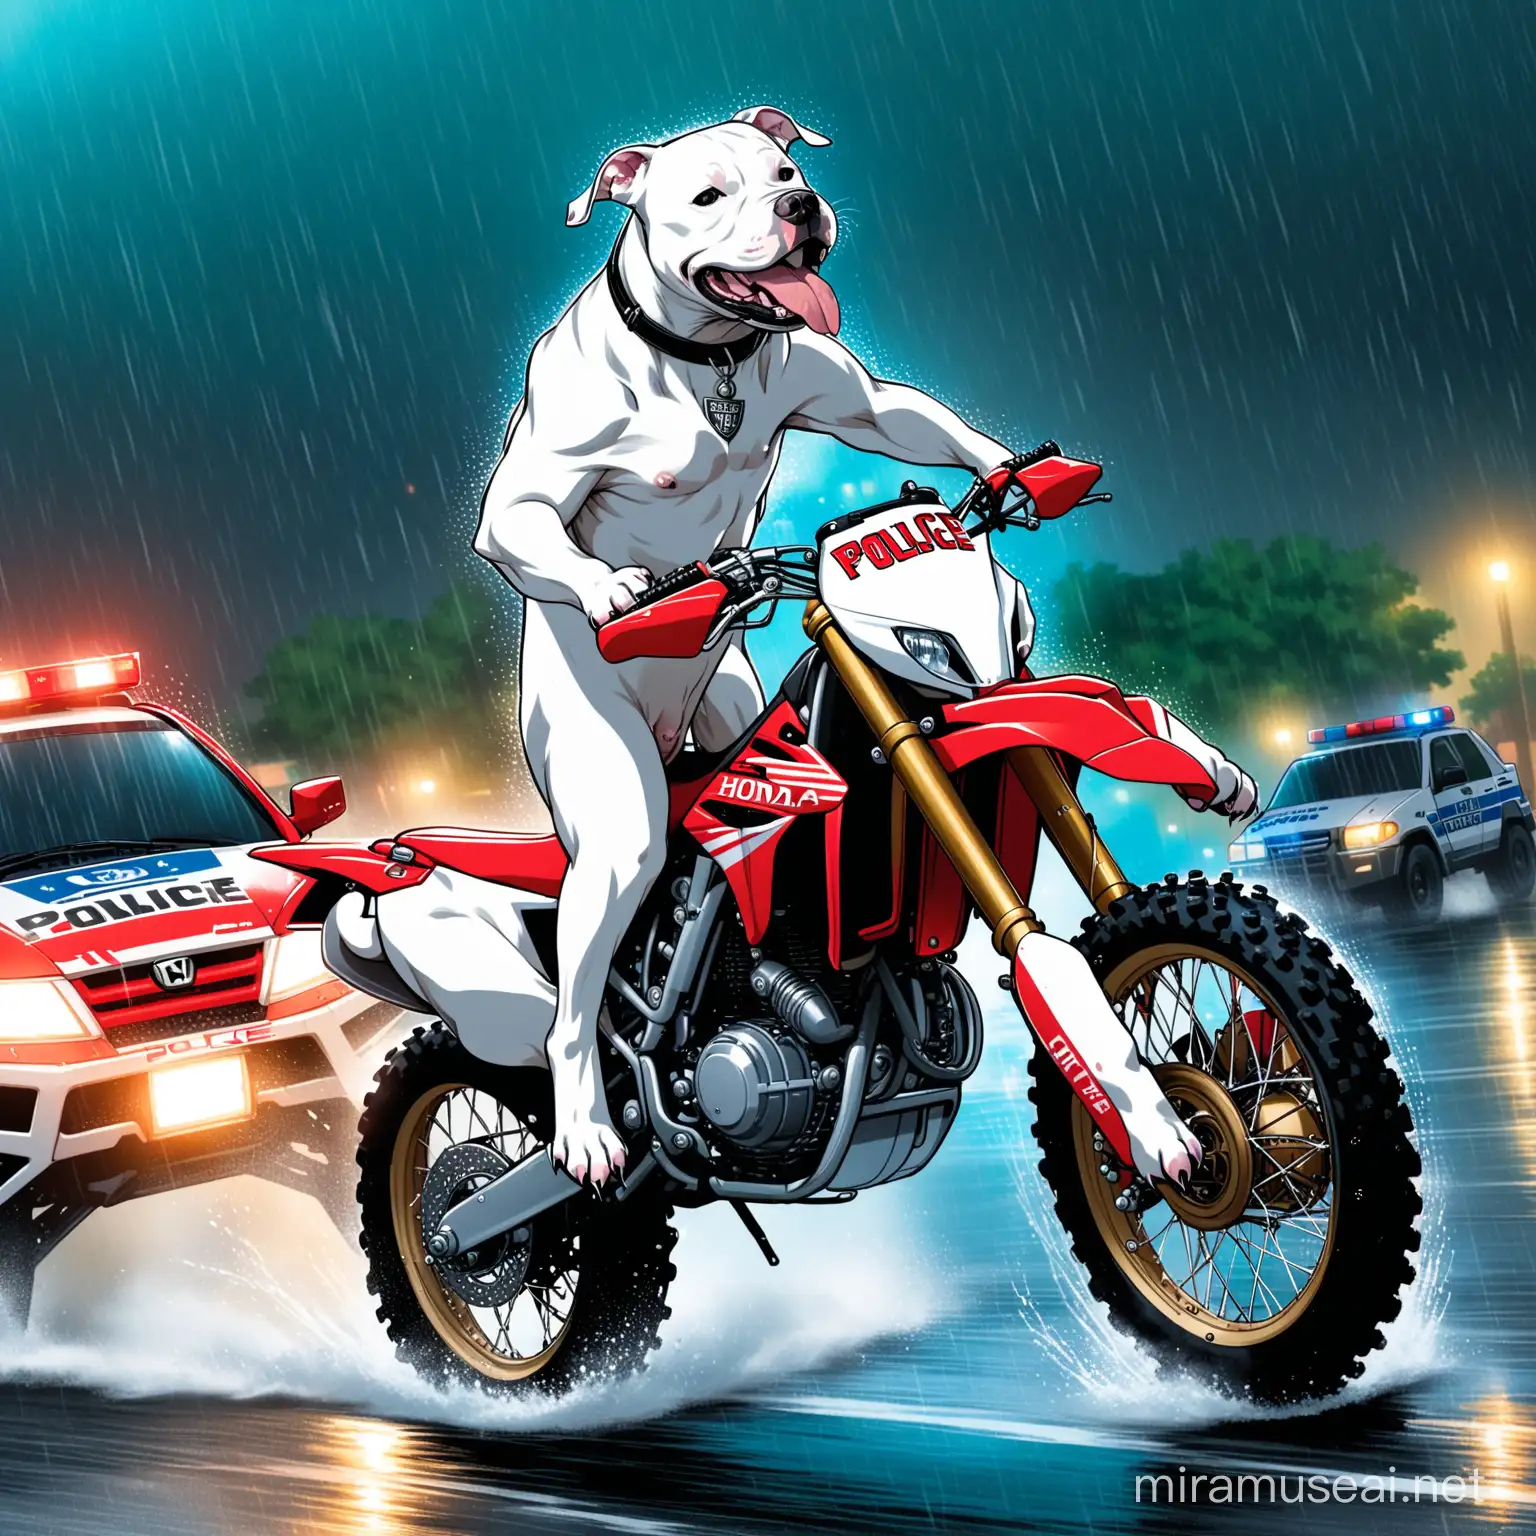 A white pitbull with a black spot that resembles hitlers mustache and pointy ears riding a honda crf450r on the back tire doing a wheelie in the rain down tha street. There is a police car with blue lights following close behind.